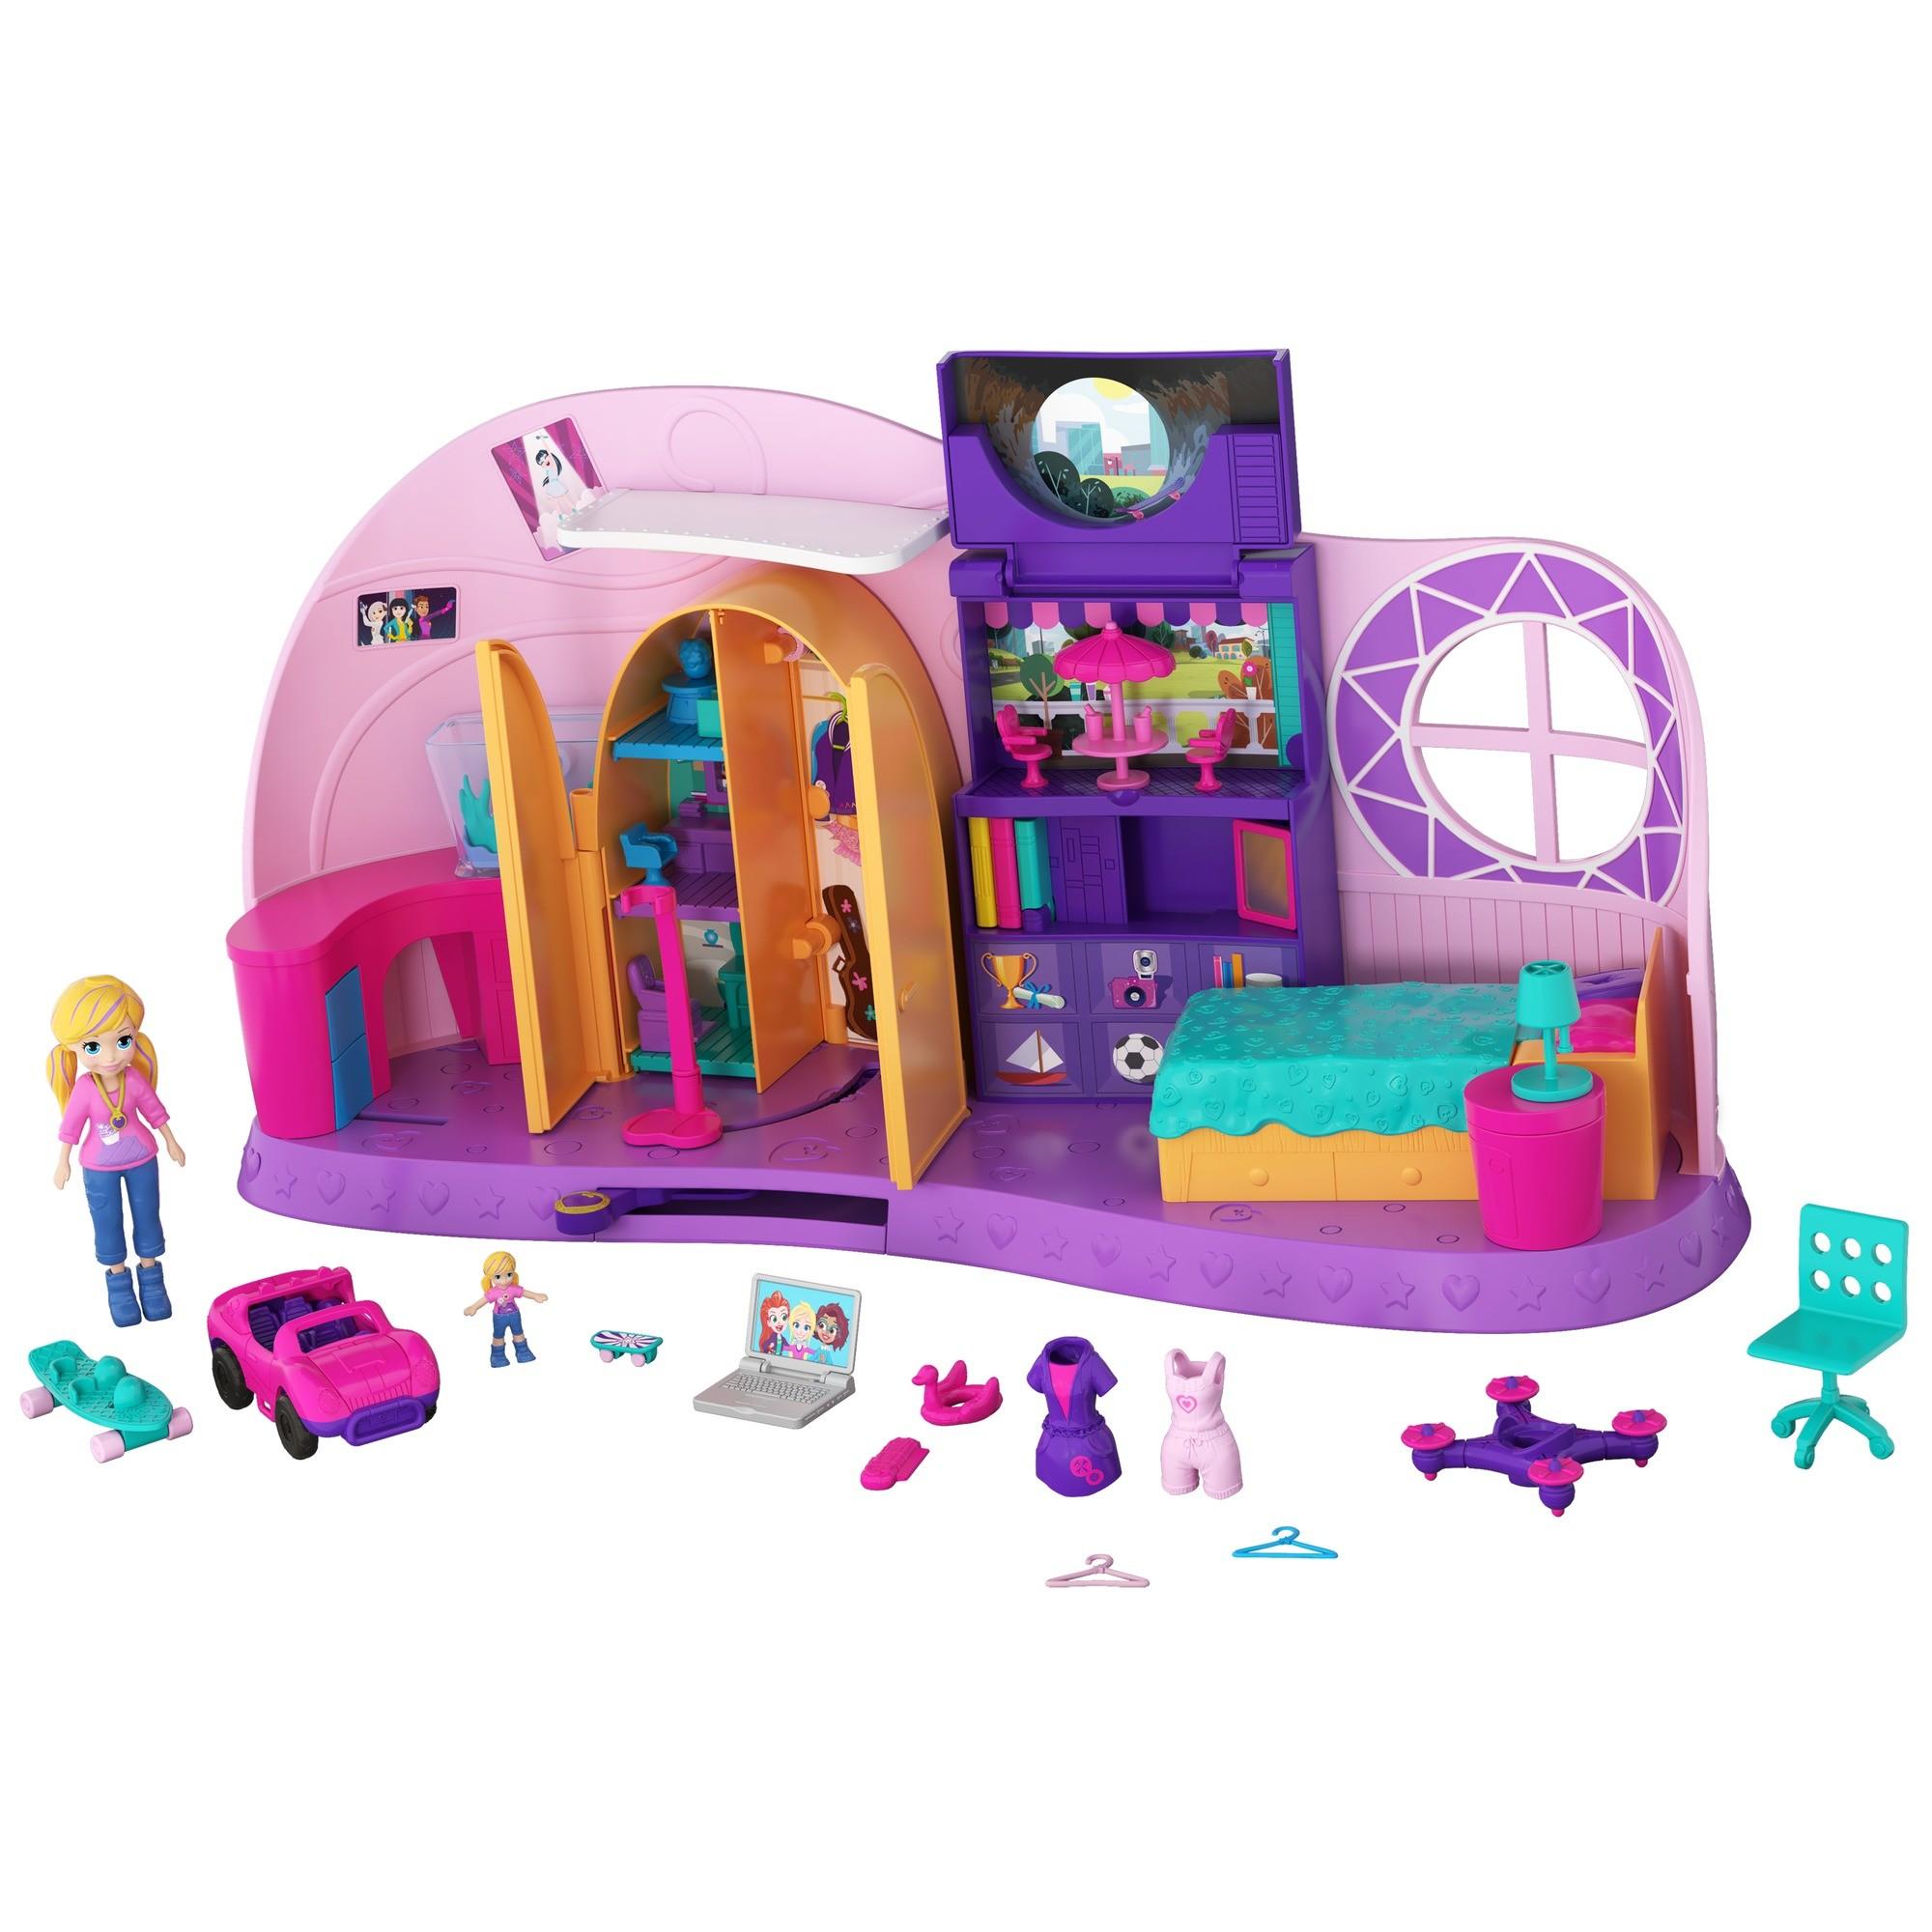 Polly Pocket Go Tiny! Room Playset with Adventure Dolls & Accessories - image 1 of 15